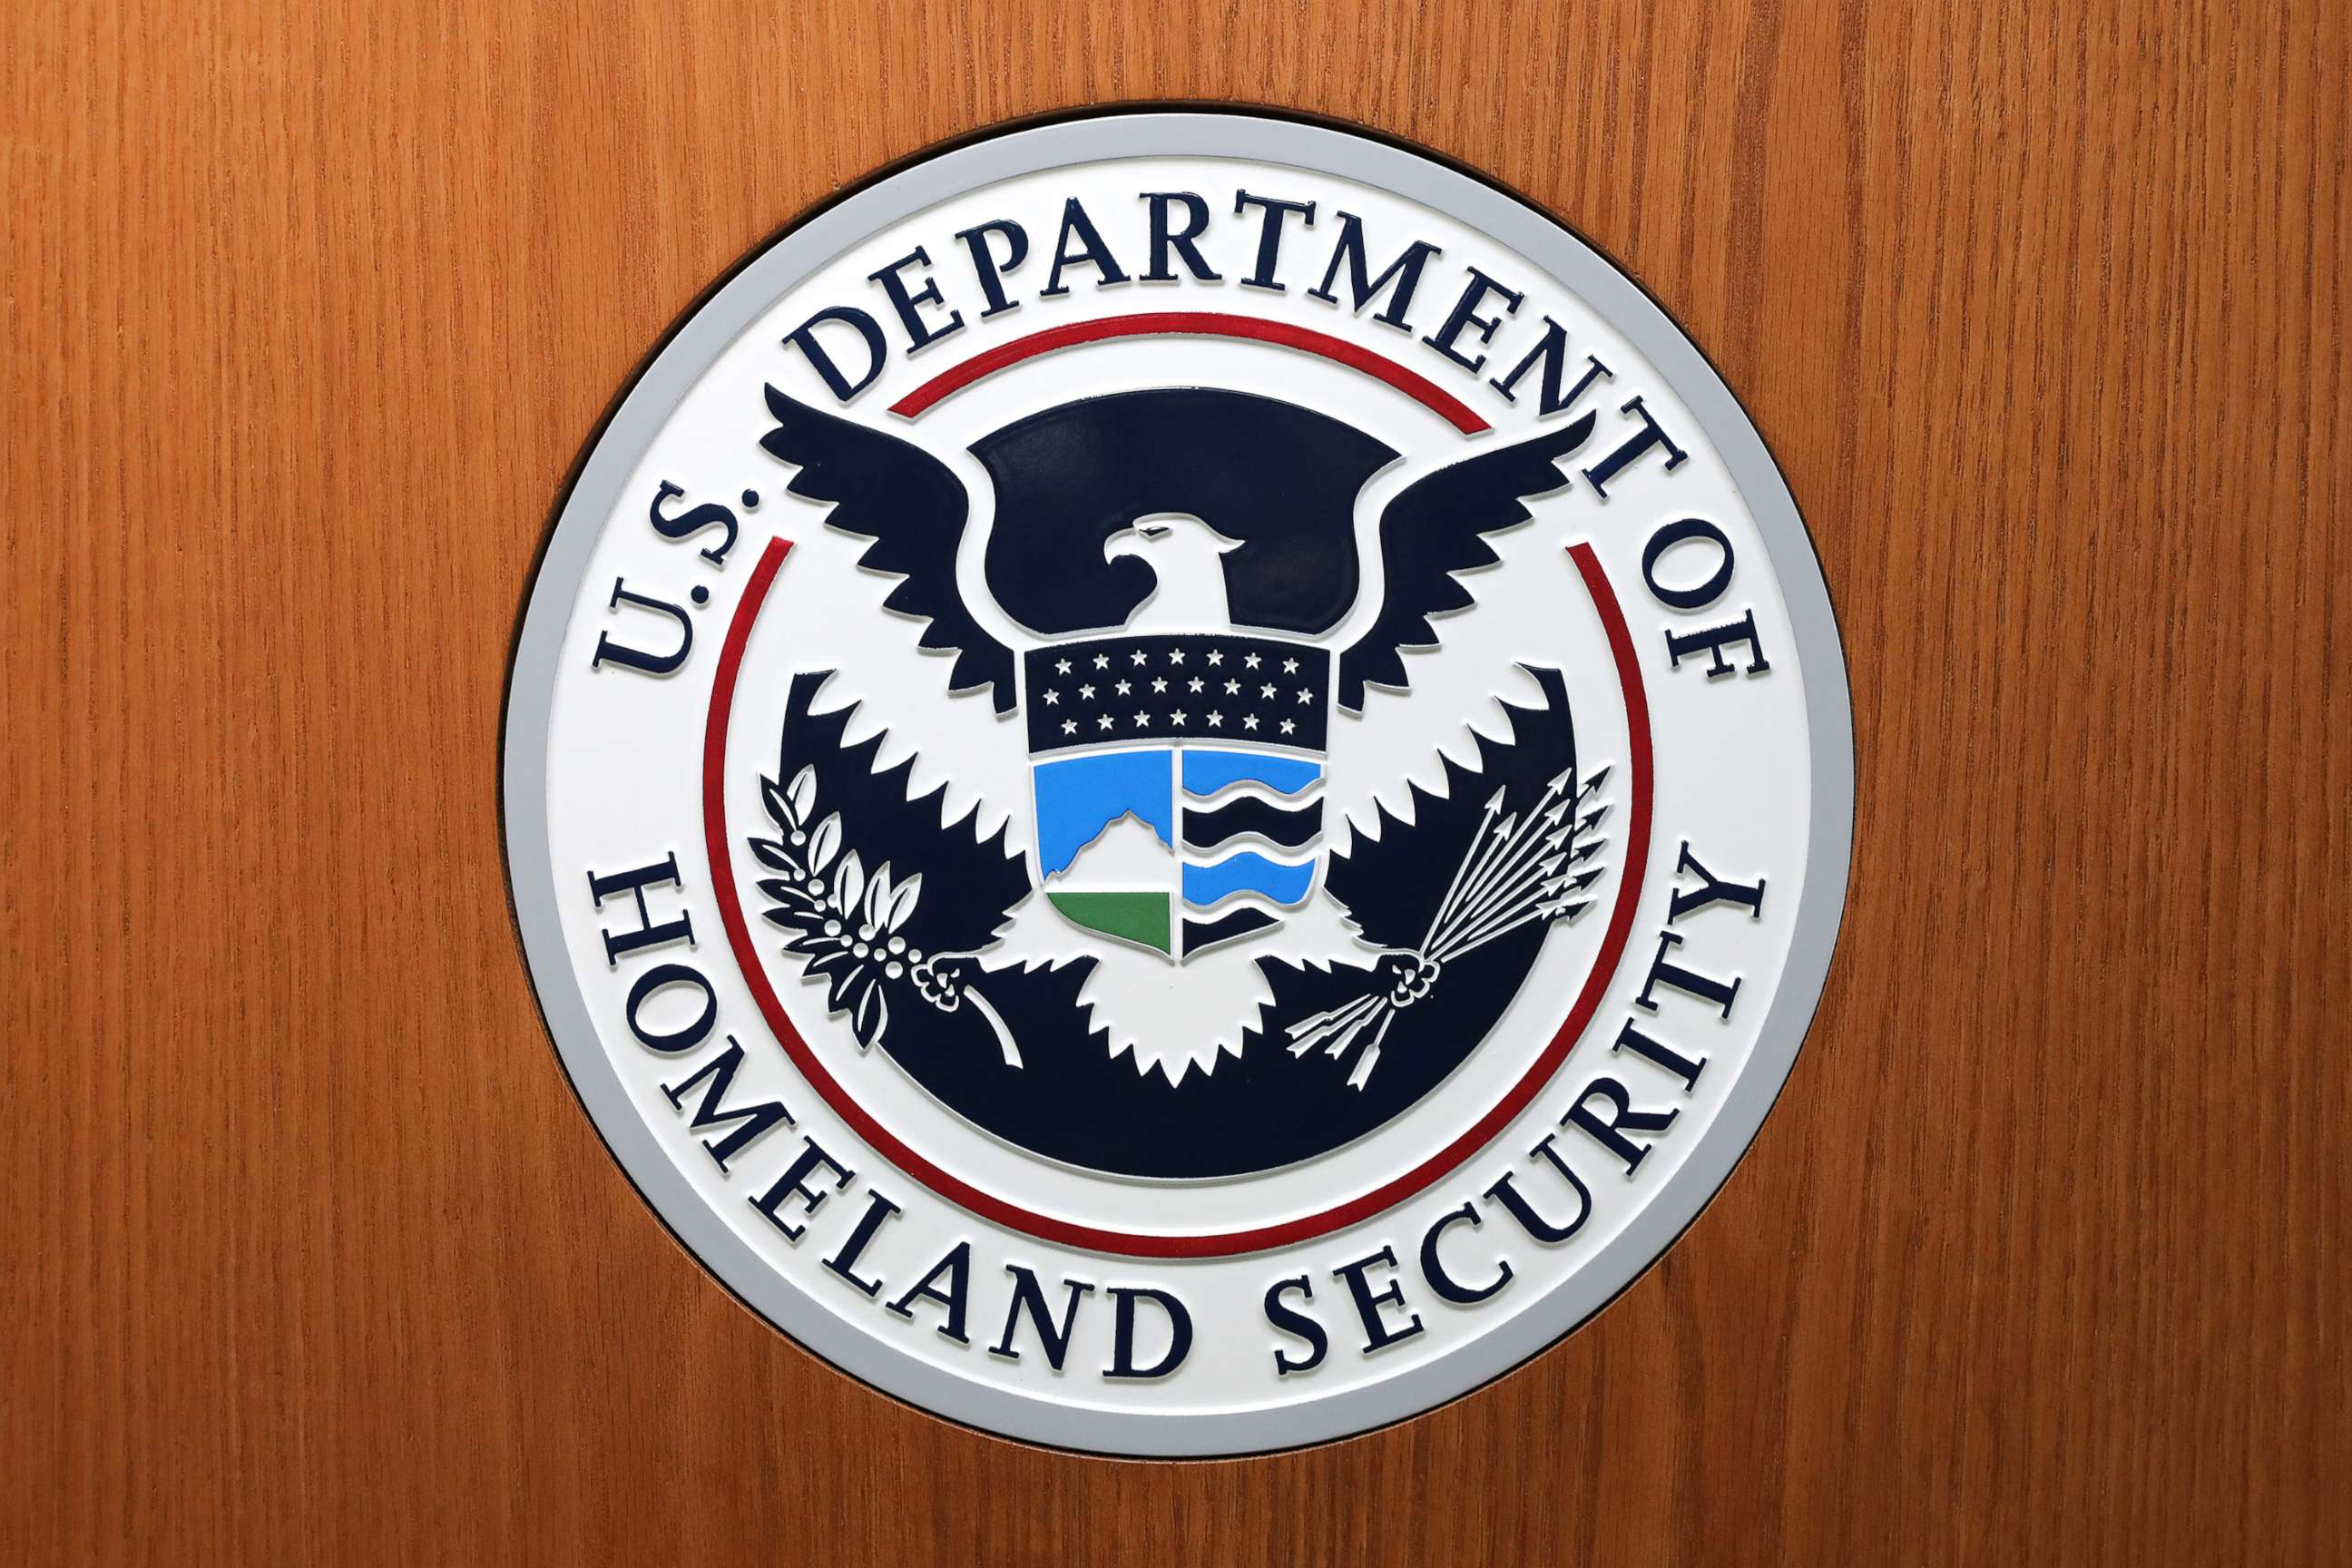 PHOTO: In this August 21, 2019, file photo, the Department of Homeland Security seal is shown in Washington, D.C.